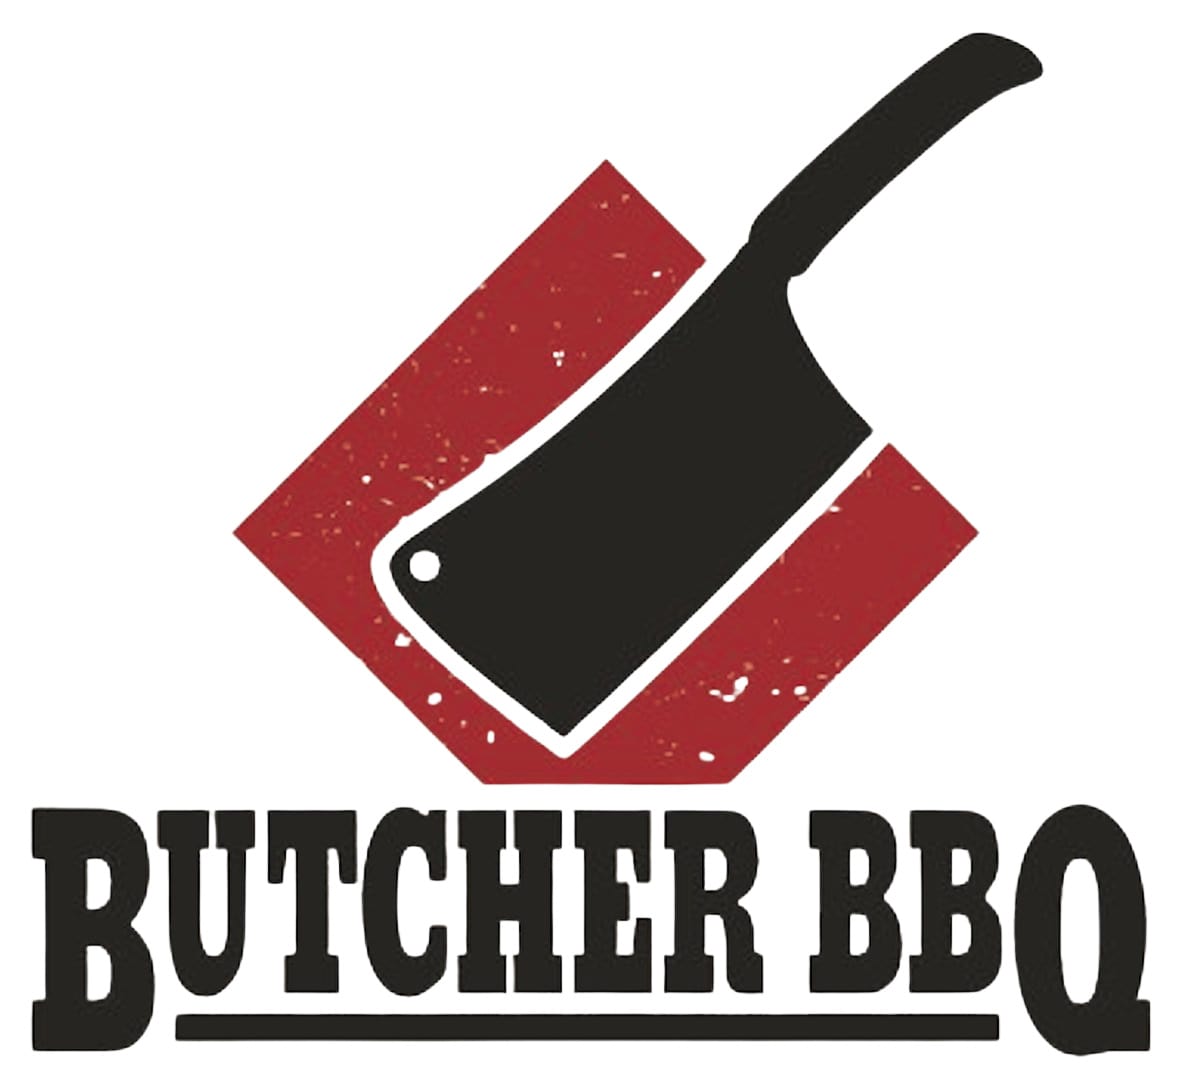 Butcher BBQ home of championship brisket injections and bbq rubs